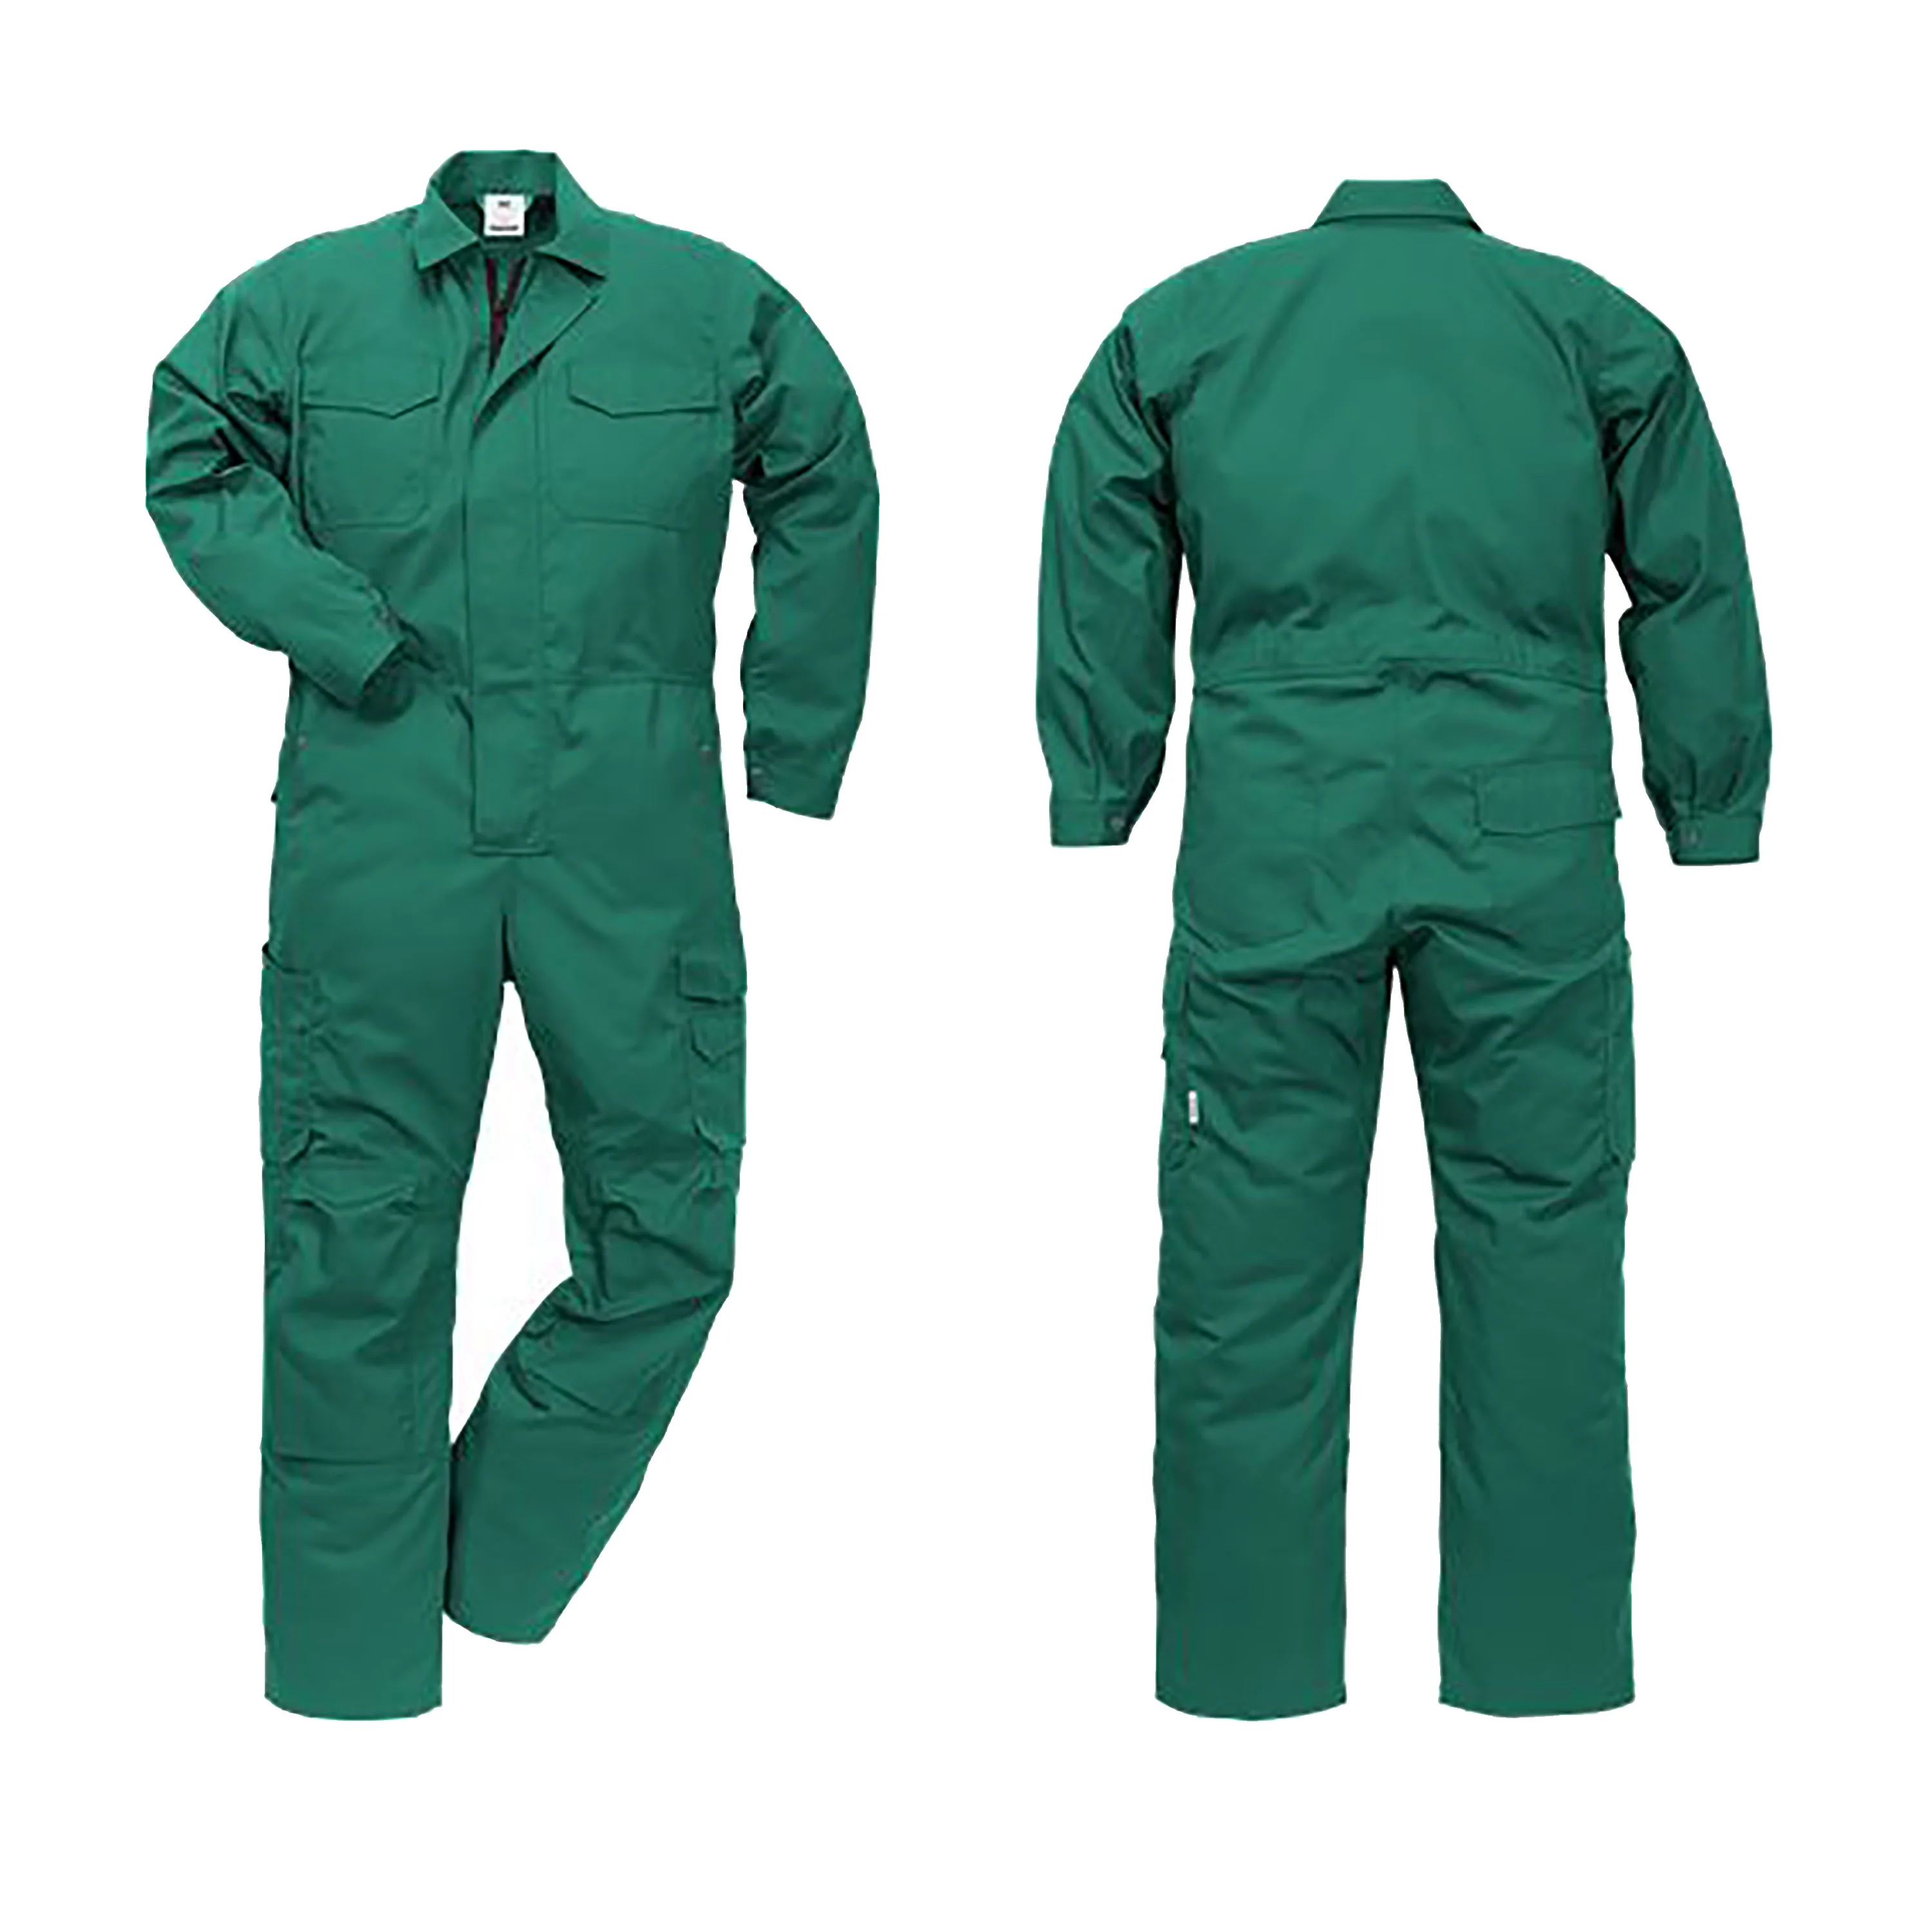 Suit AP-8200 Fire Resistant Cotton Arc Welding Protective Coverall Clothing 